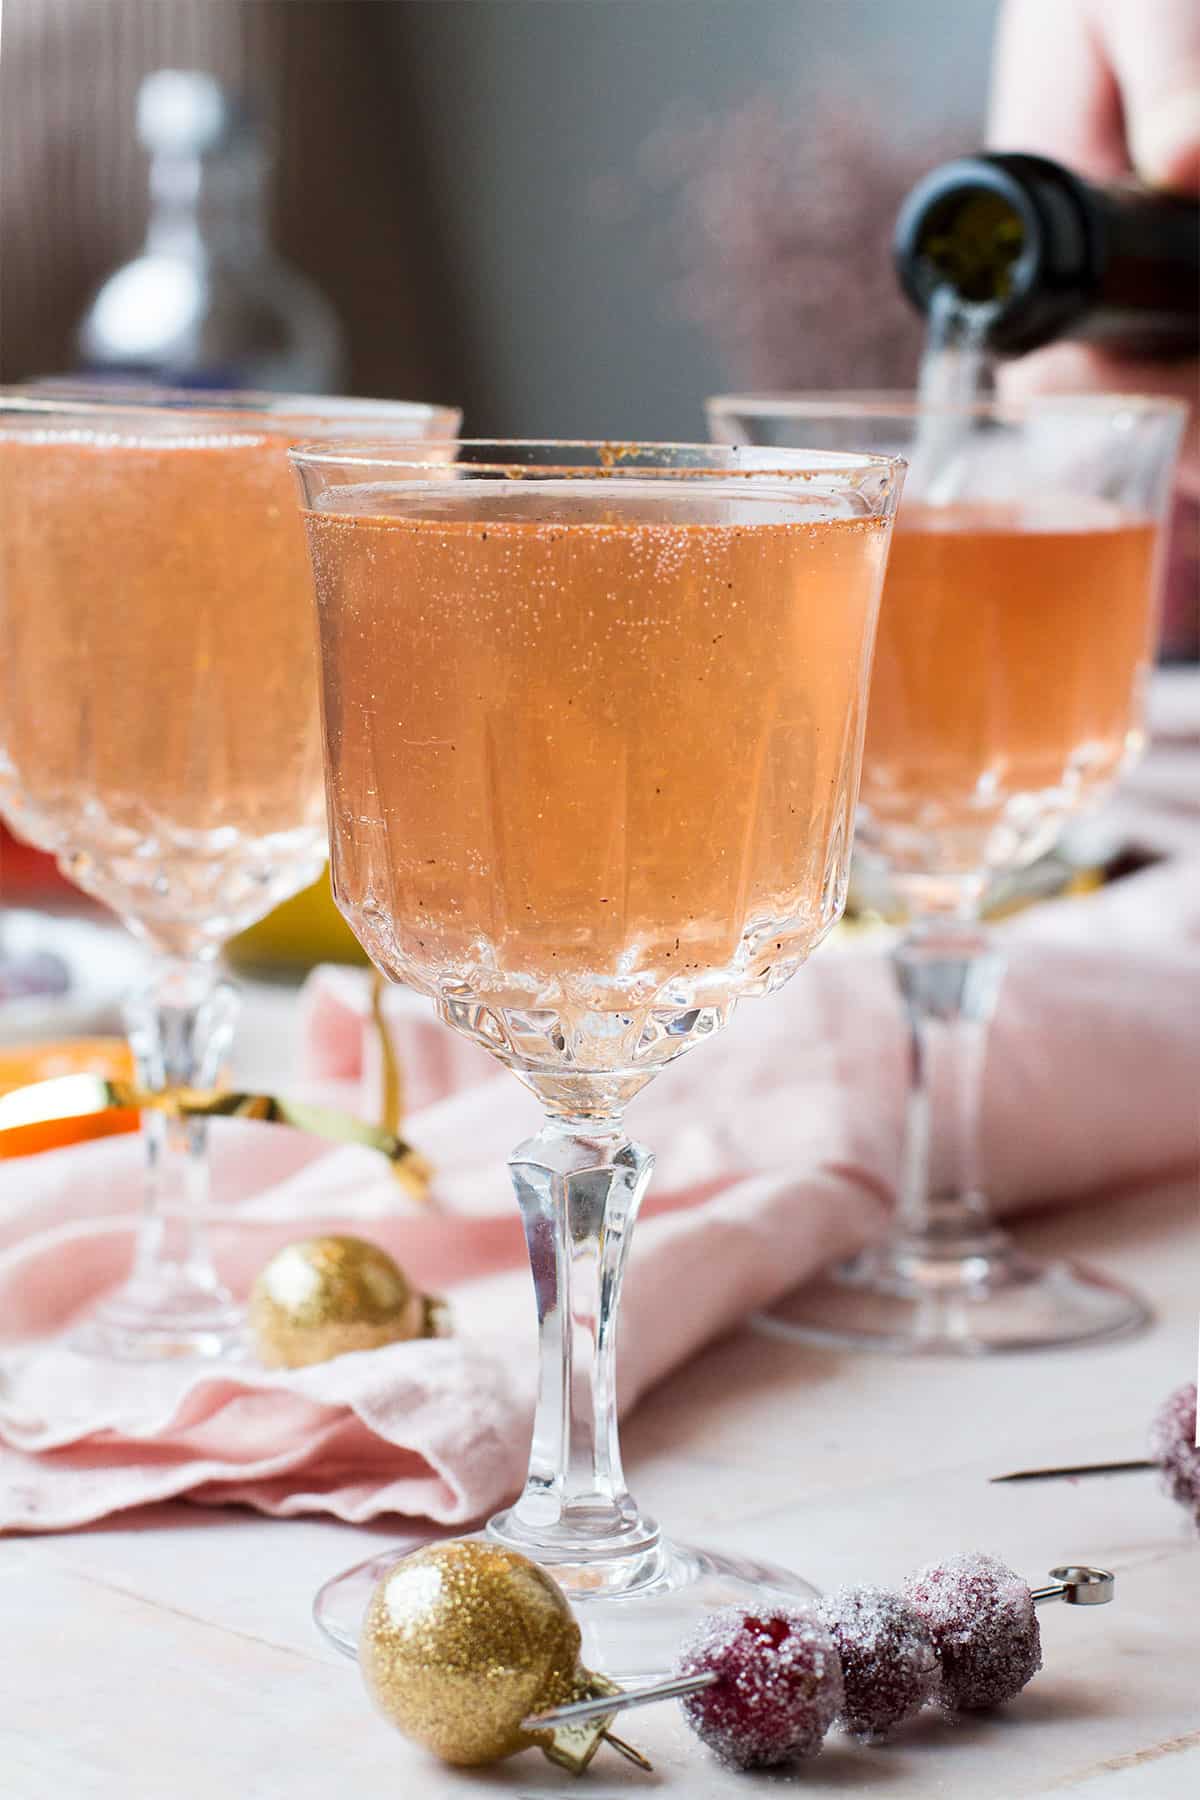 Three vintage glasses with cranberry vodka champagne.